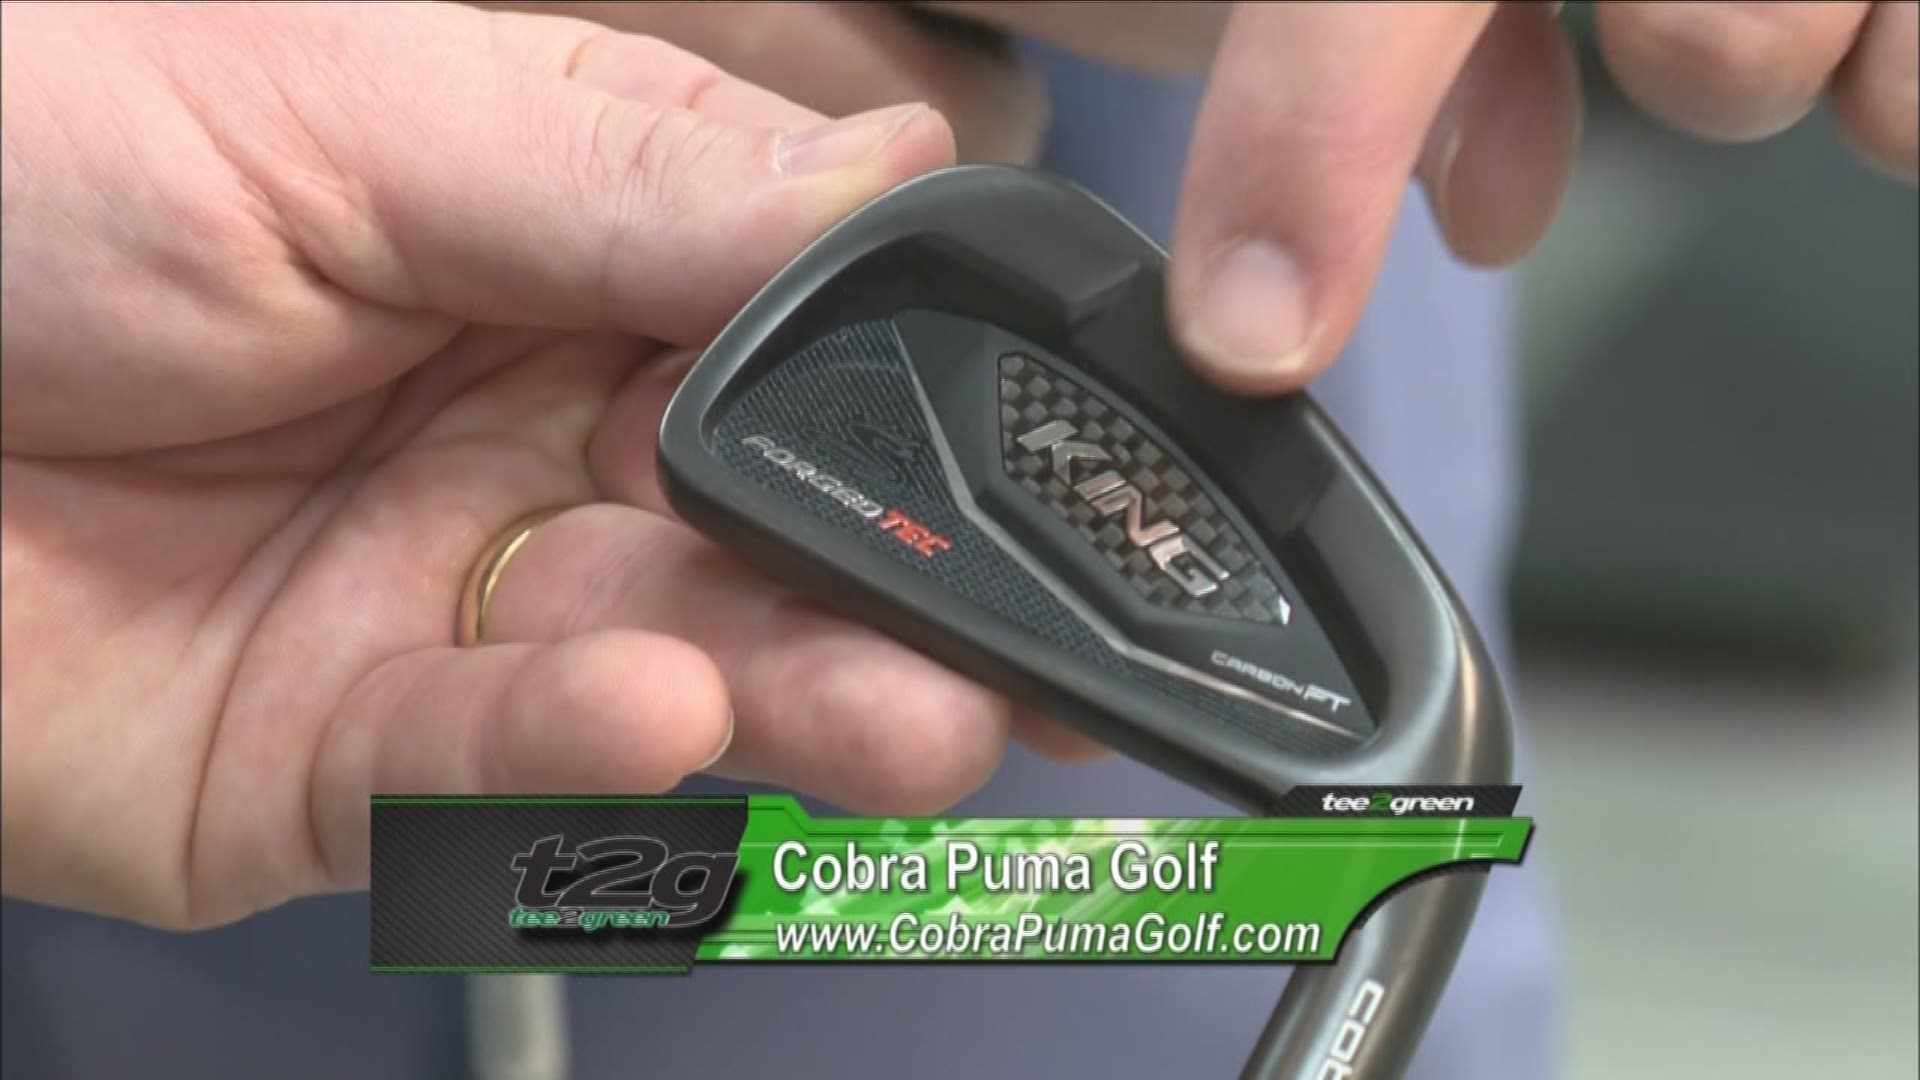 Kevin Sylvester takes a look at the new drivers and irons for your golf game from Cobra Puma Golf.